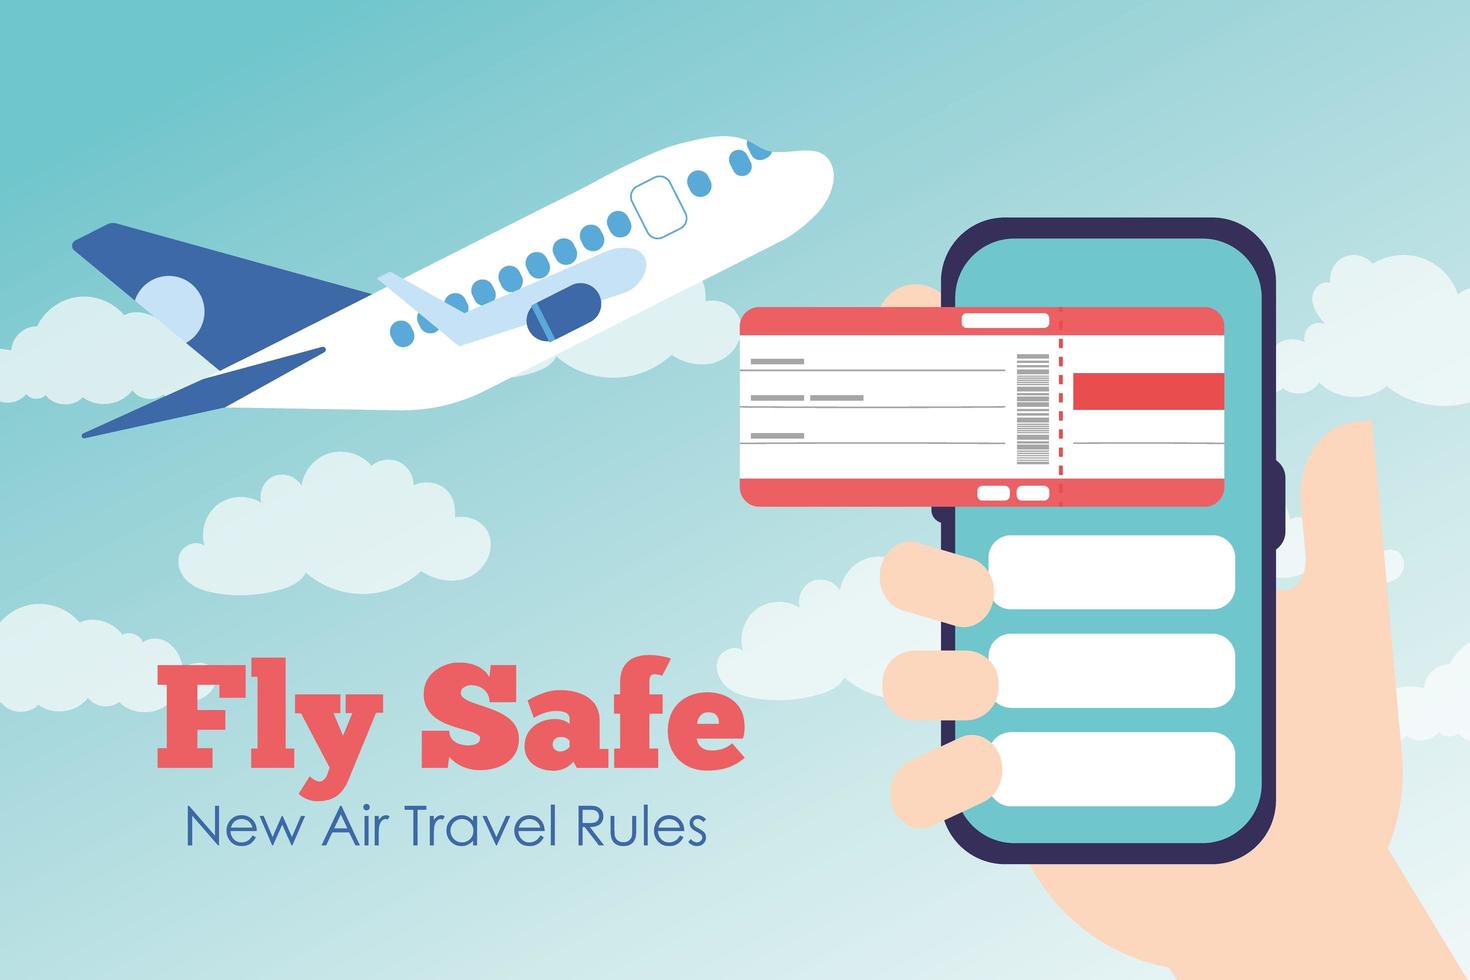 fly safe campaign lettering poster with ticket flight in smartphone and airplane flying vector